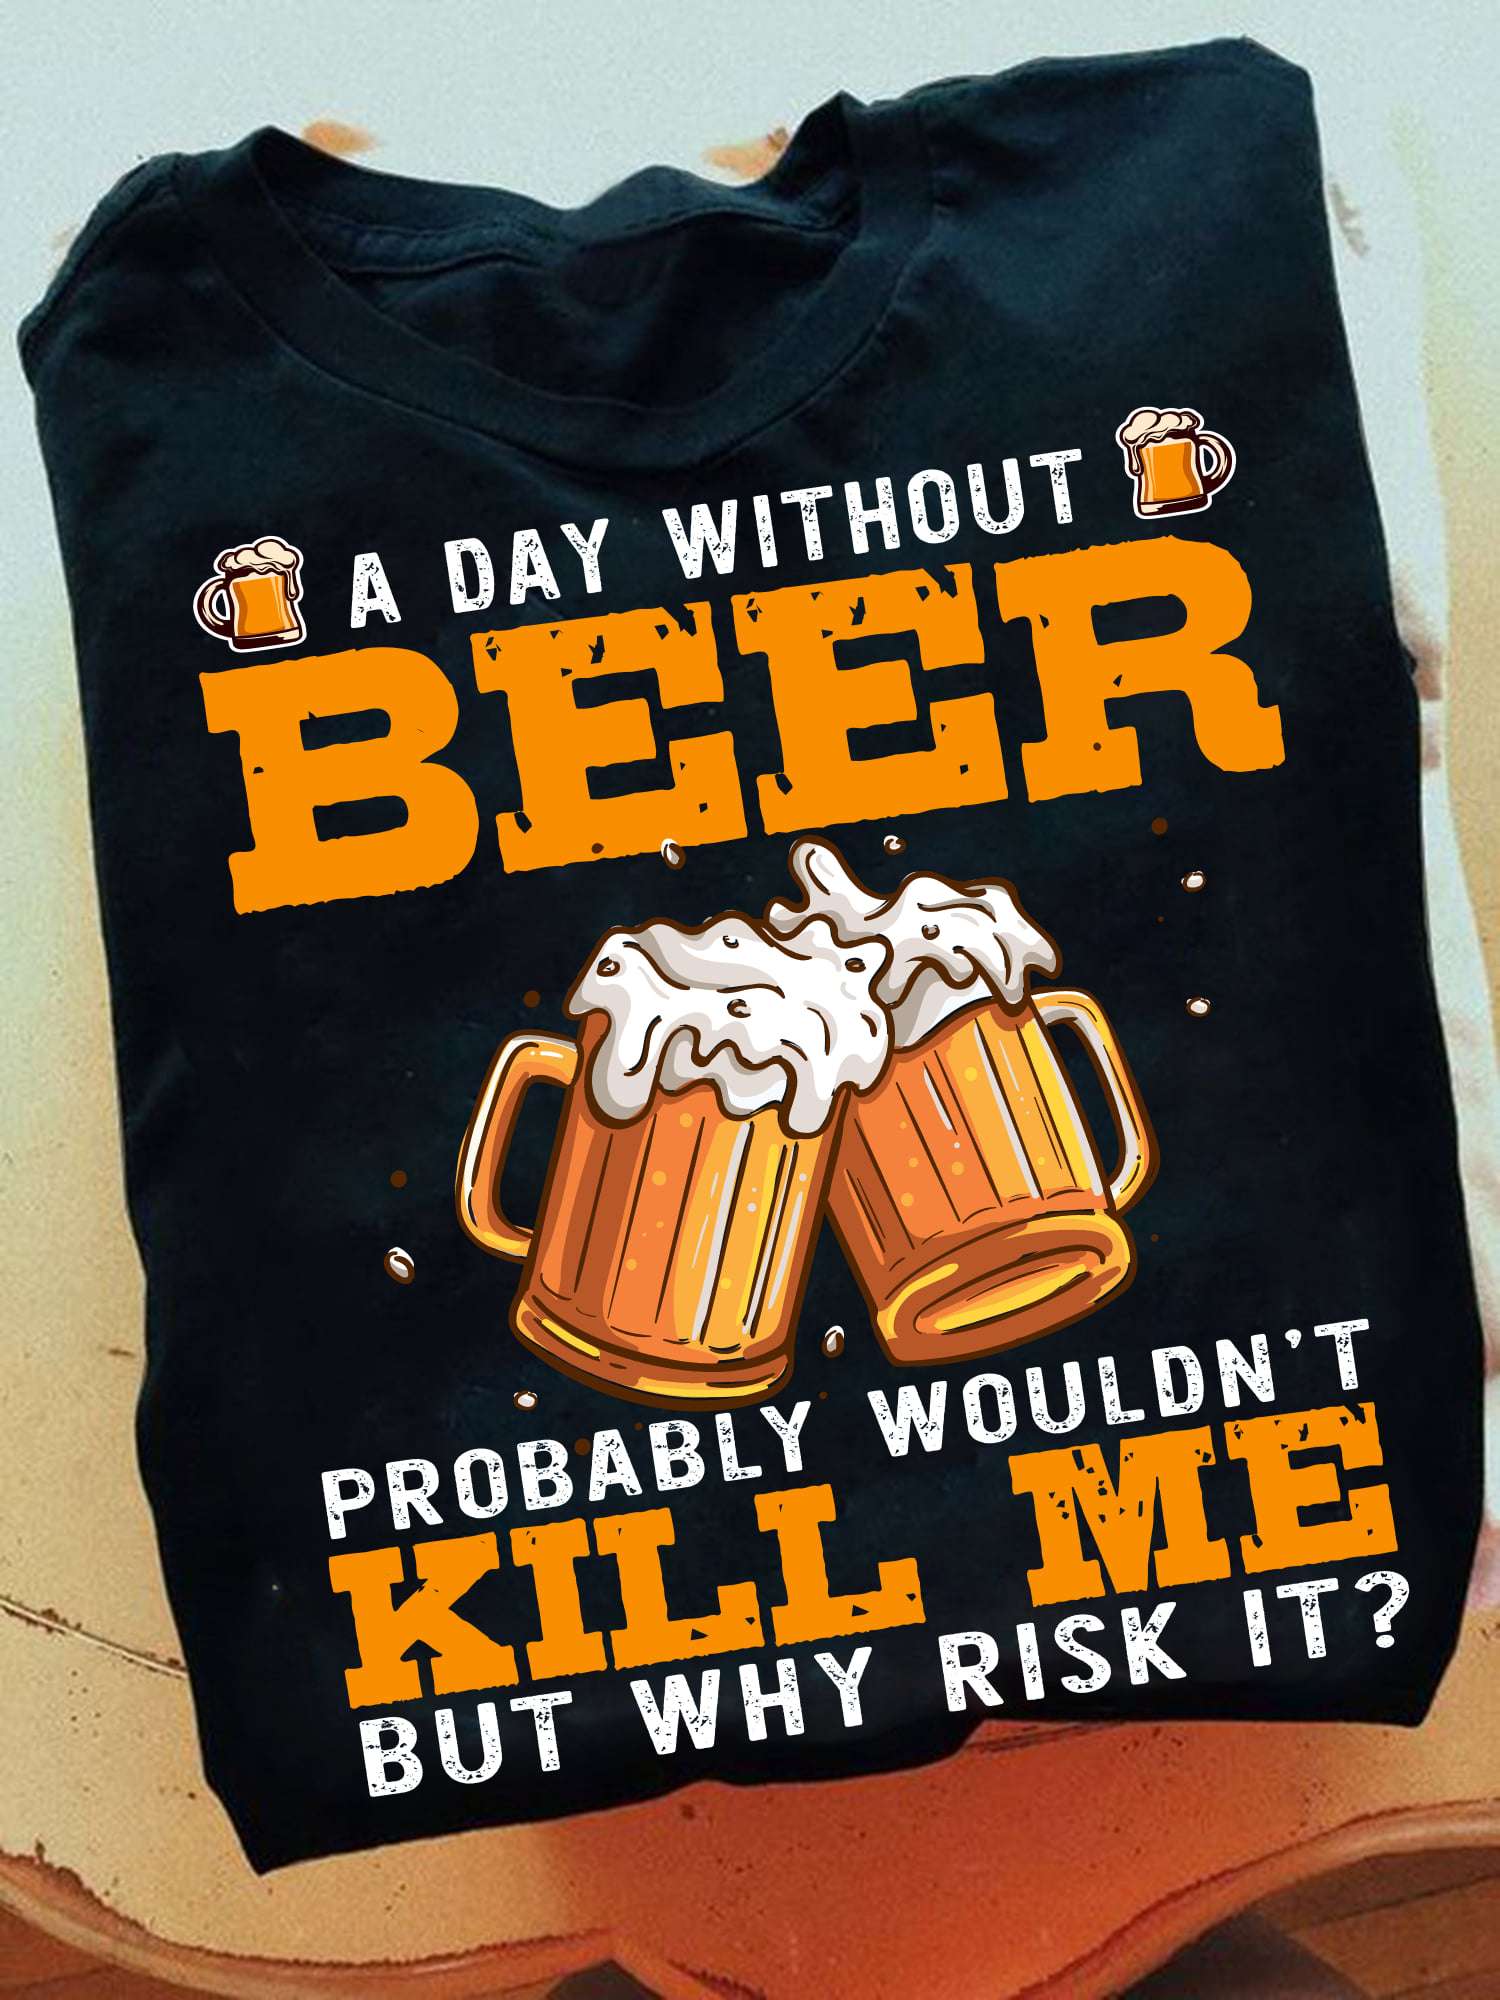 A day without beer probably wouldn't kill me but why risk it - Beer all days